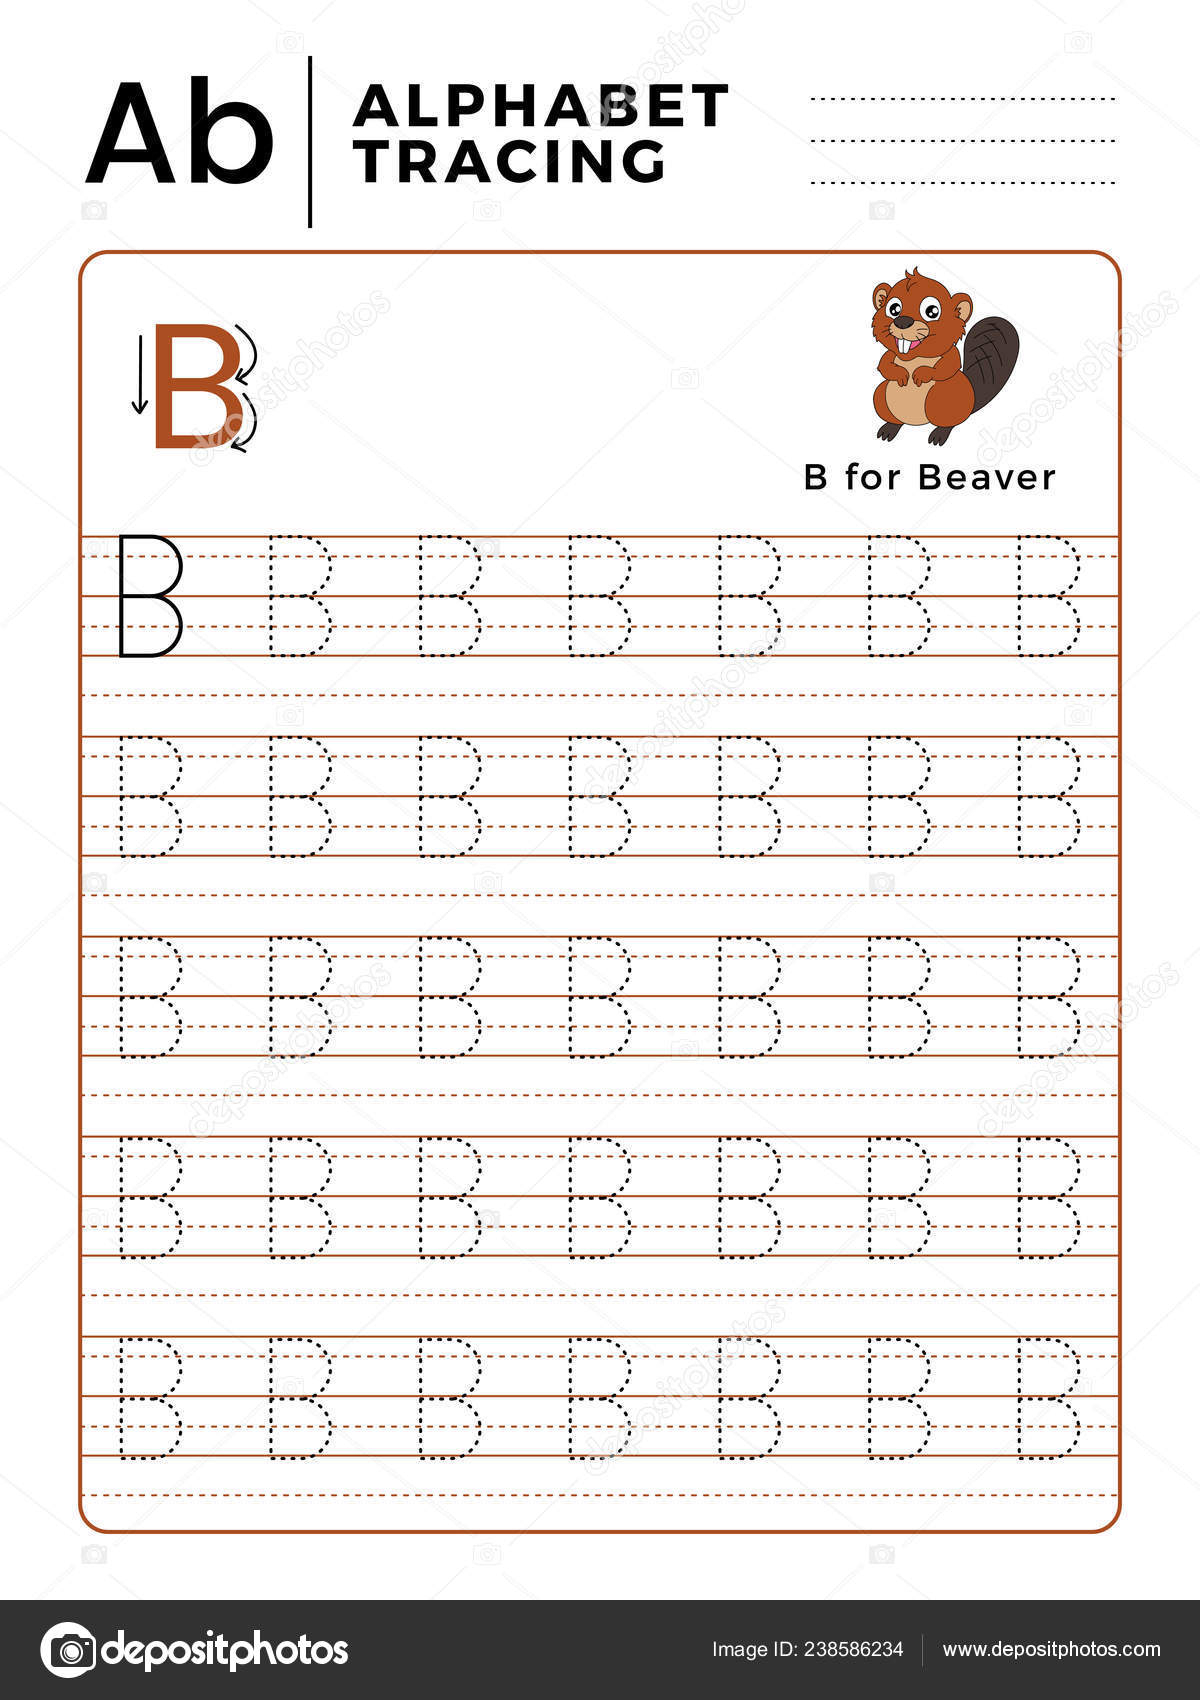 Letter Alphabet Tracing Book Example Funny Beaver Cartoon regarding Preschool Worksheets Tracing Letters And Numbers